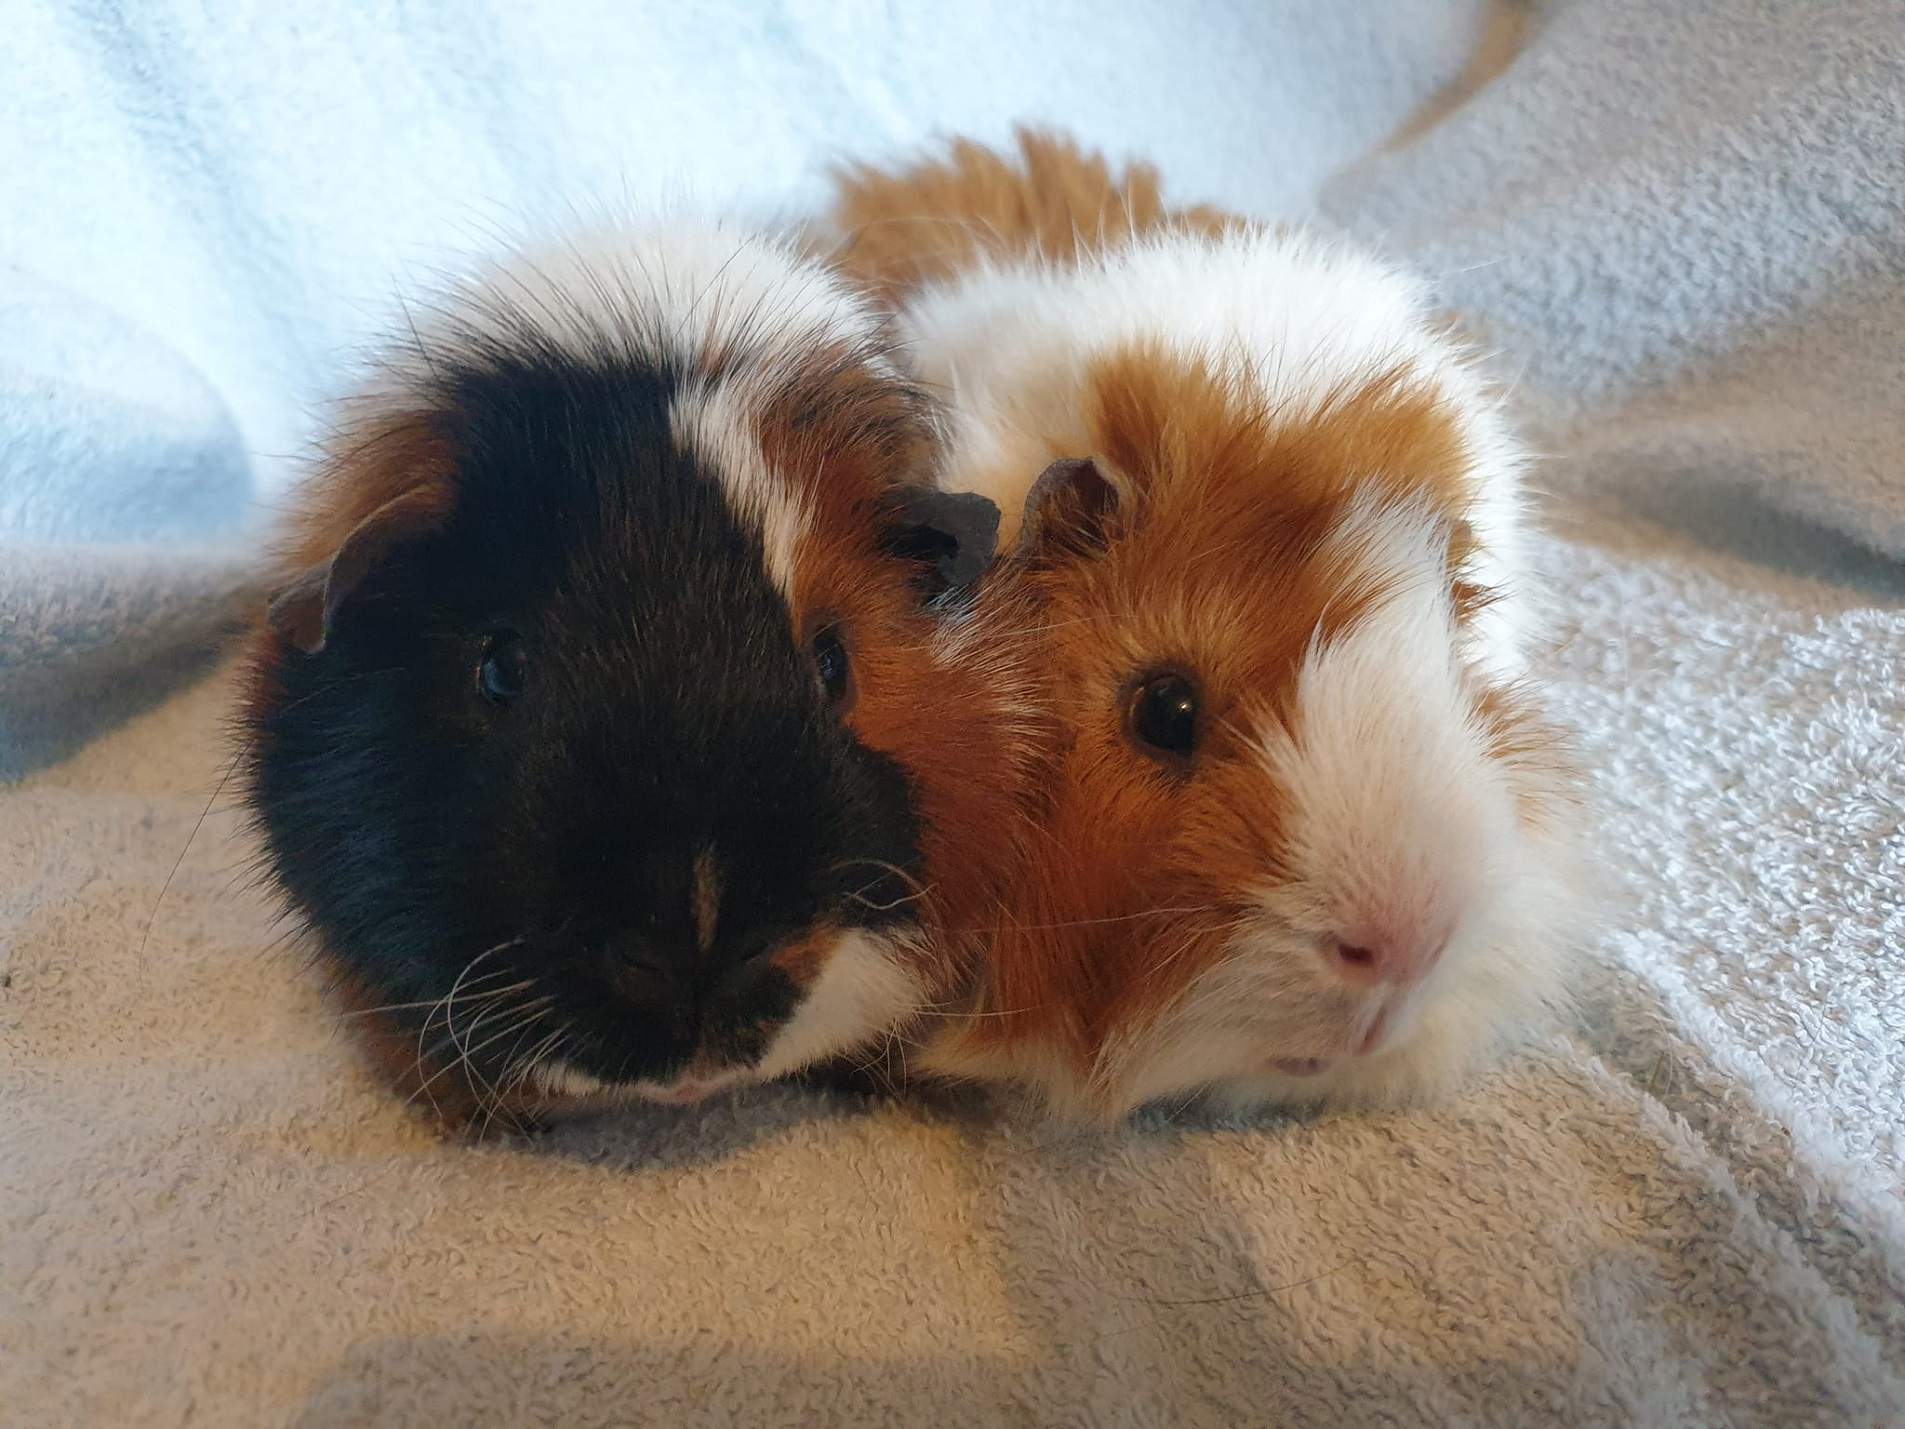 Teddy & Toffee (being Fostered)